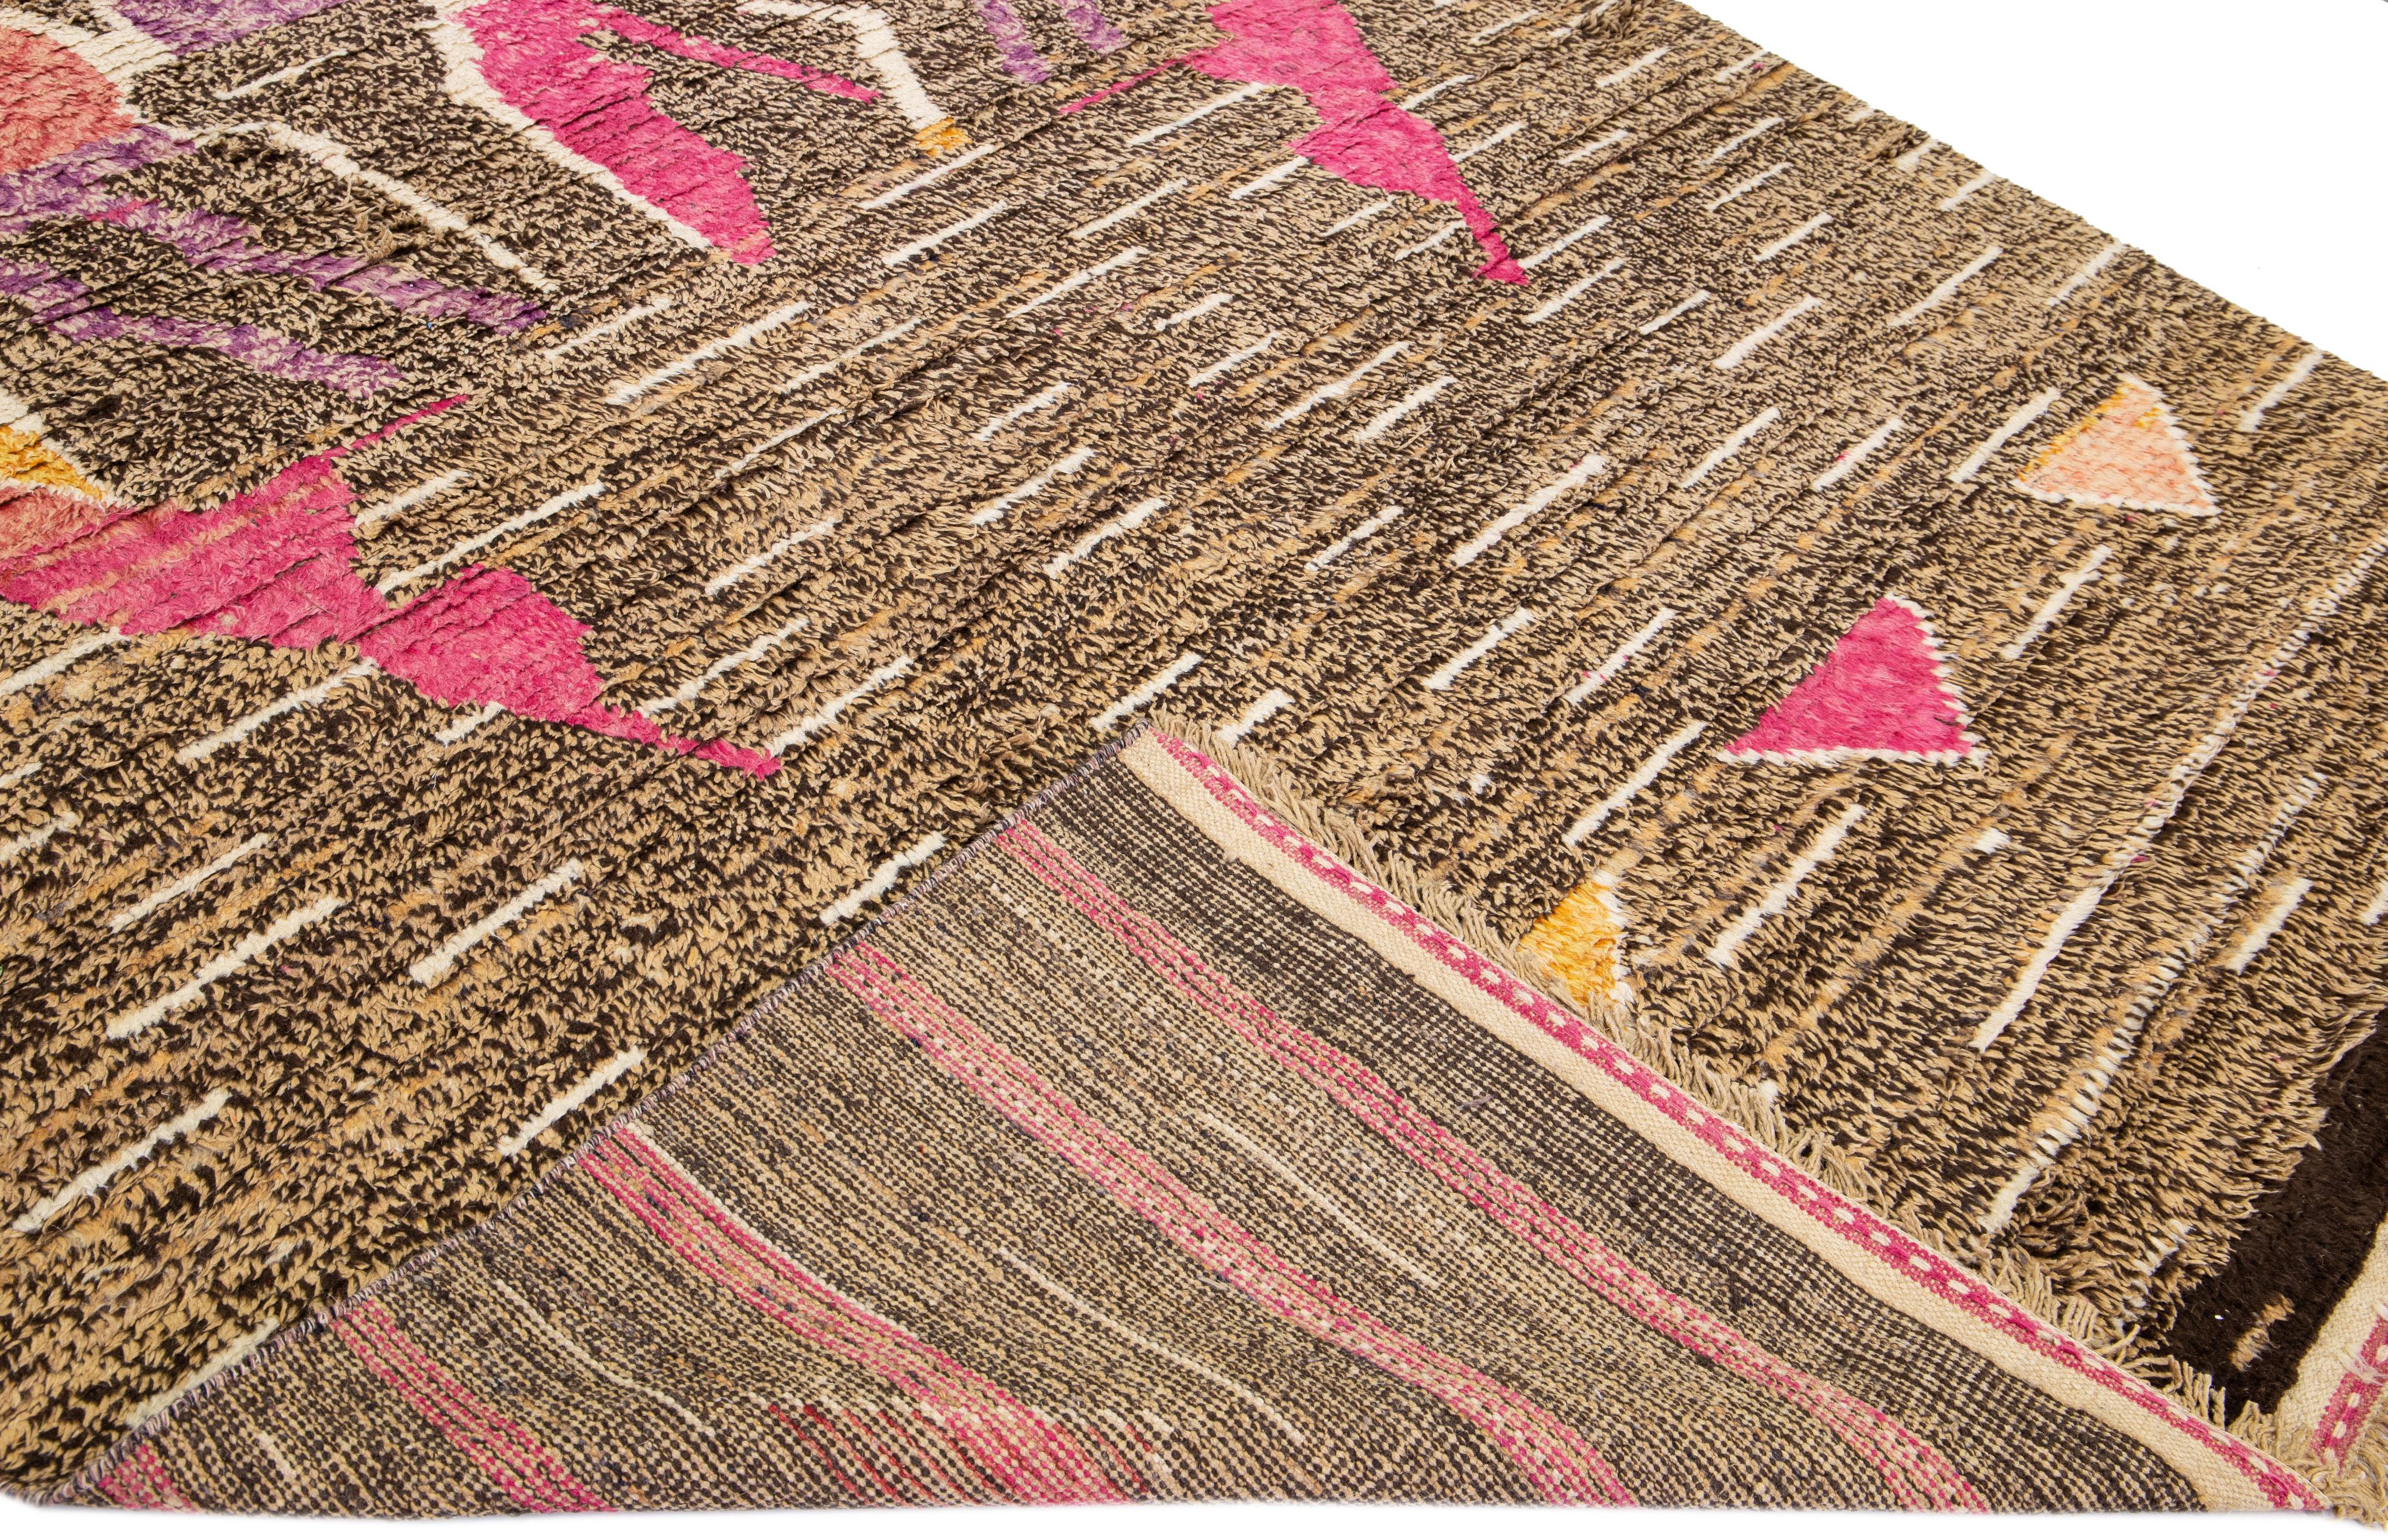 Beautiful modern Moroccan style hand-knotted wool rug with a tan and brown field. This piece has multicolor accent color in a gorgeous Abstract design with fringes on the top and bottom end.

This rug measures: 8'10